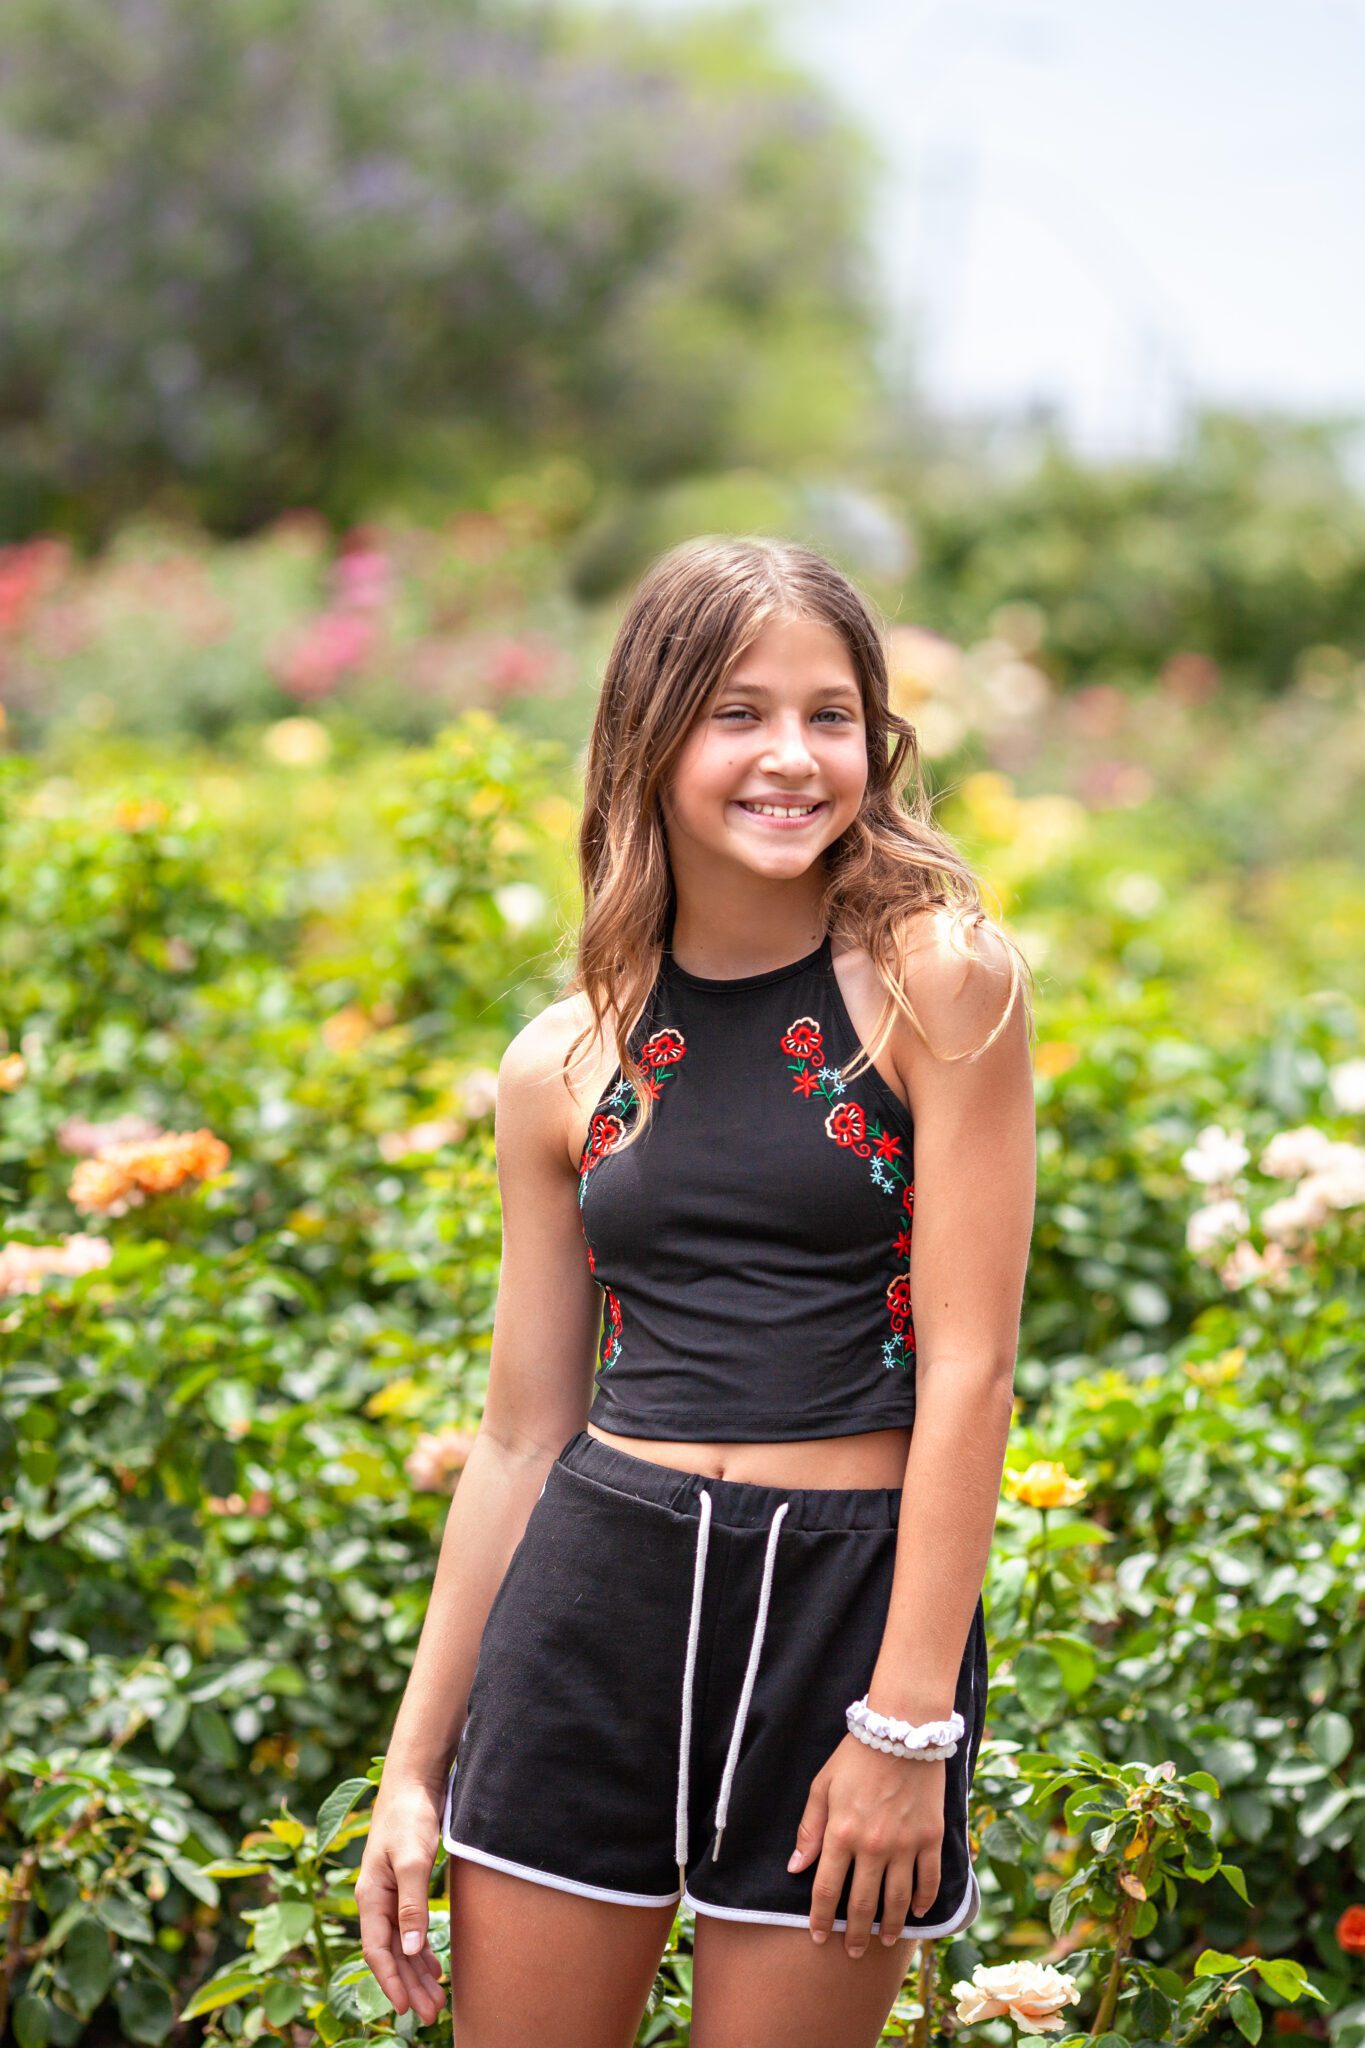 Children's photography in Phoenix near Mesa with greenery and roses